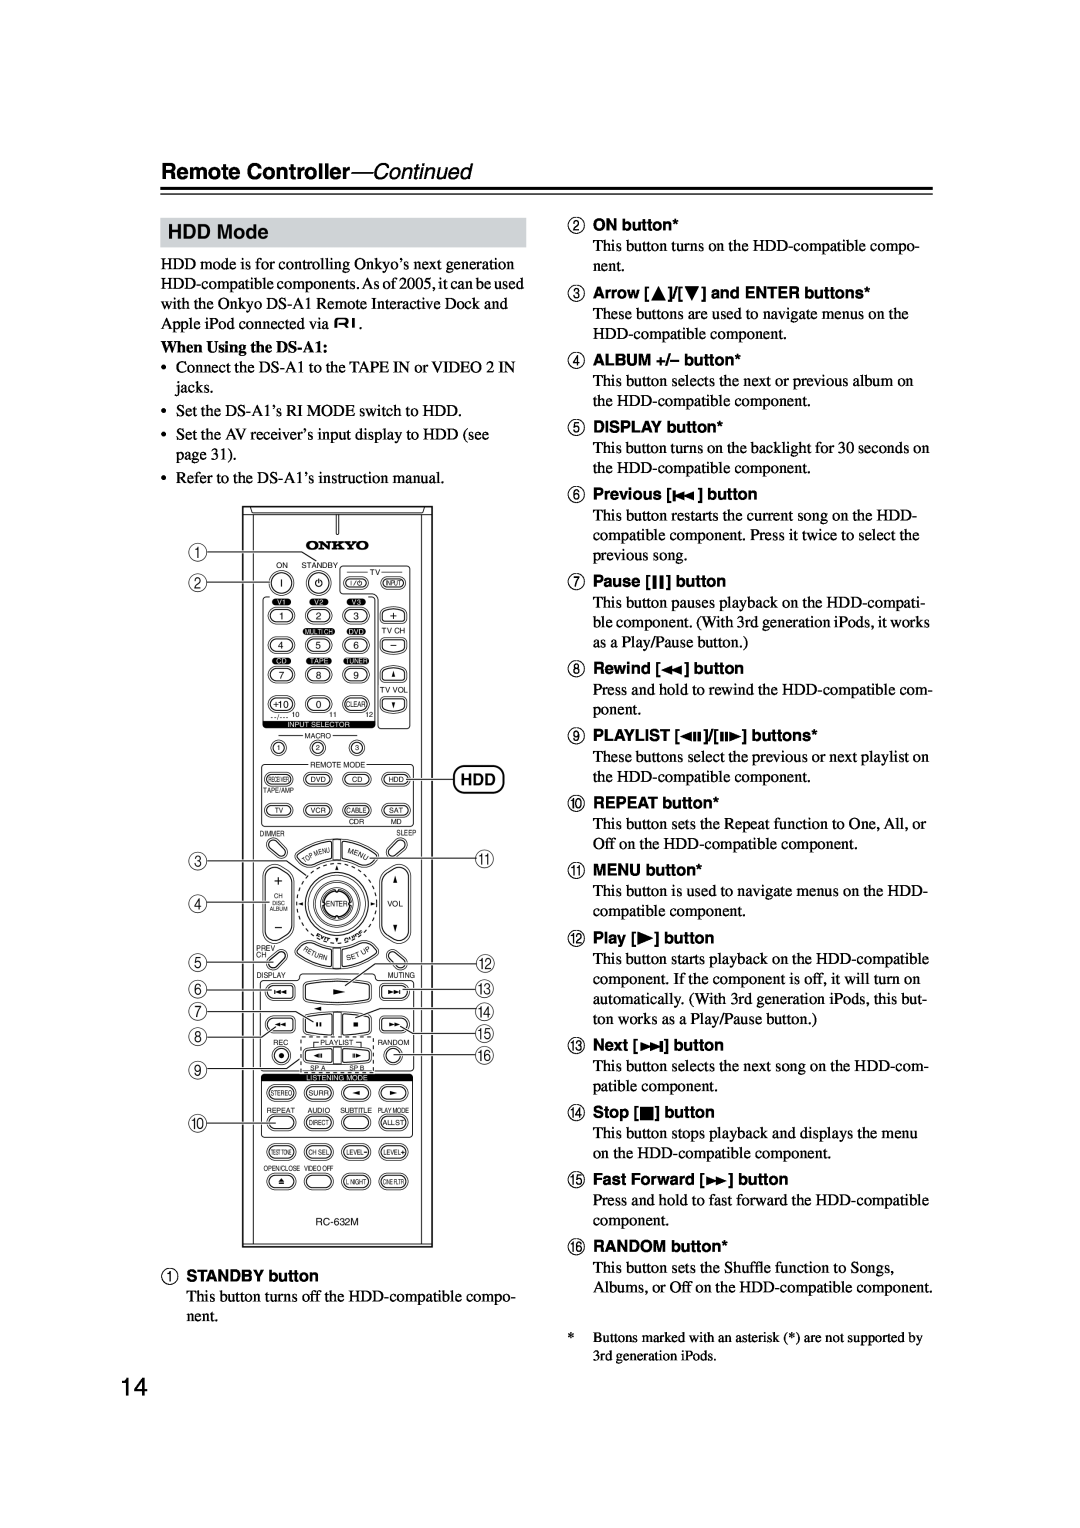 Onkyo TX-SR573 instruction manual HDD Mode, Remote Controller—Continued 